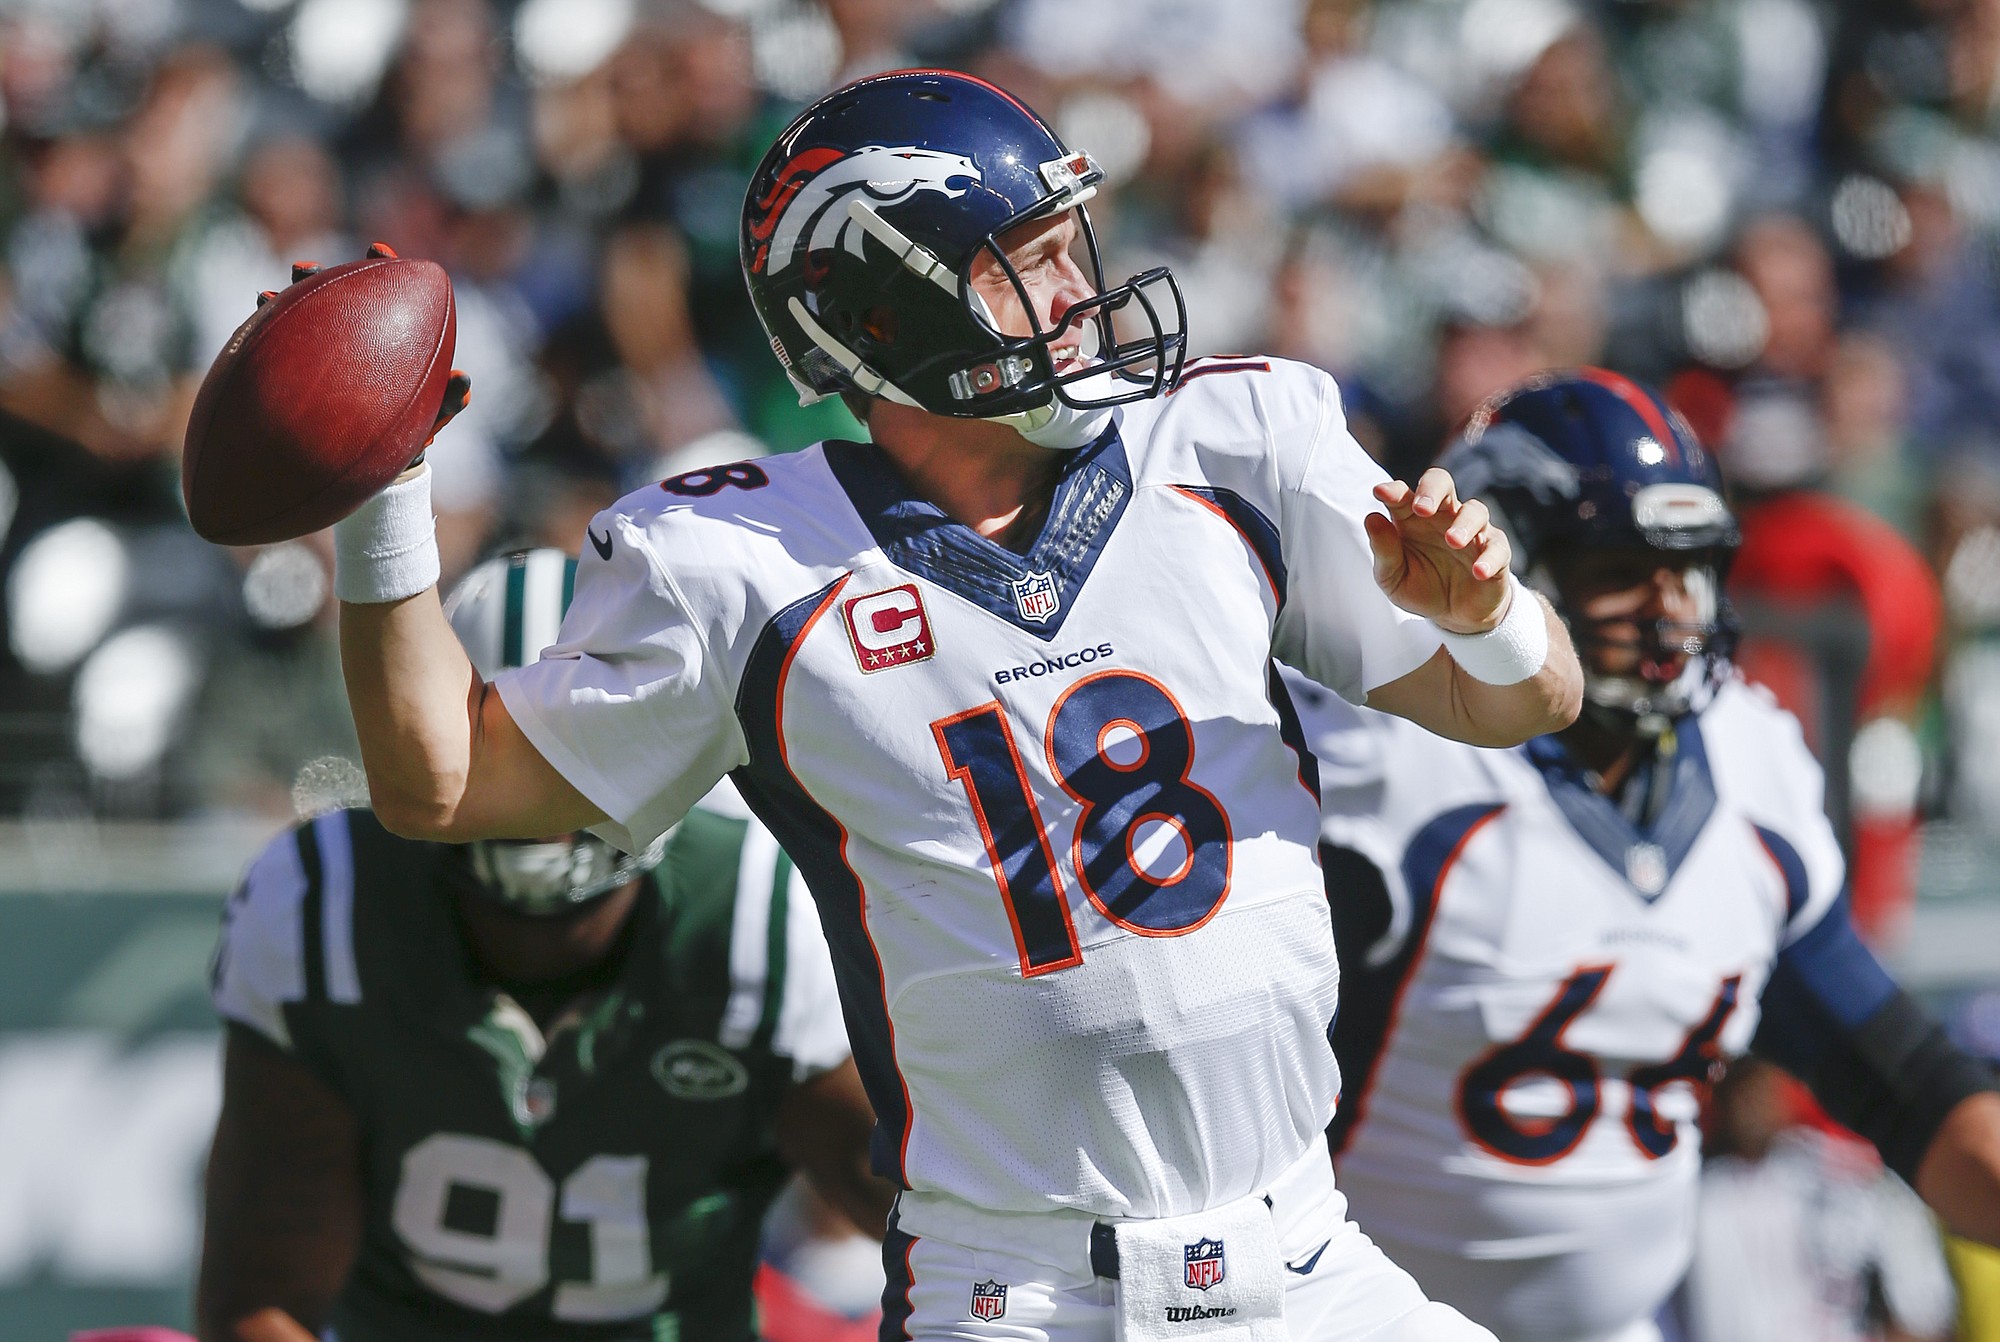 Denver Broncos quarterback Peyton Manning (18) throws against the New York Jets in the first quarter Sunday, Oct. 12, 2014, in East Rutherford, N.J.